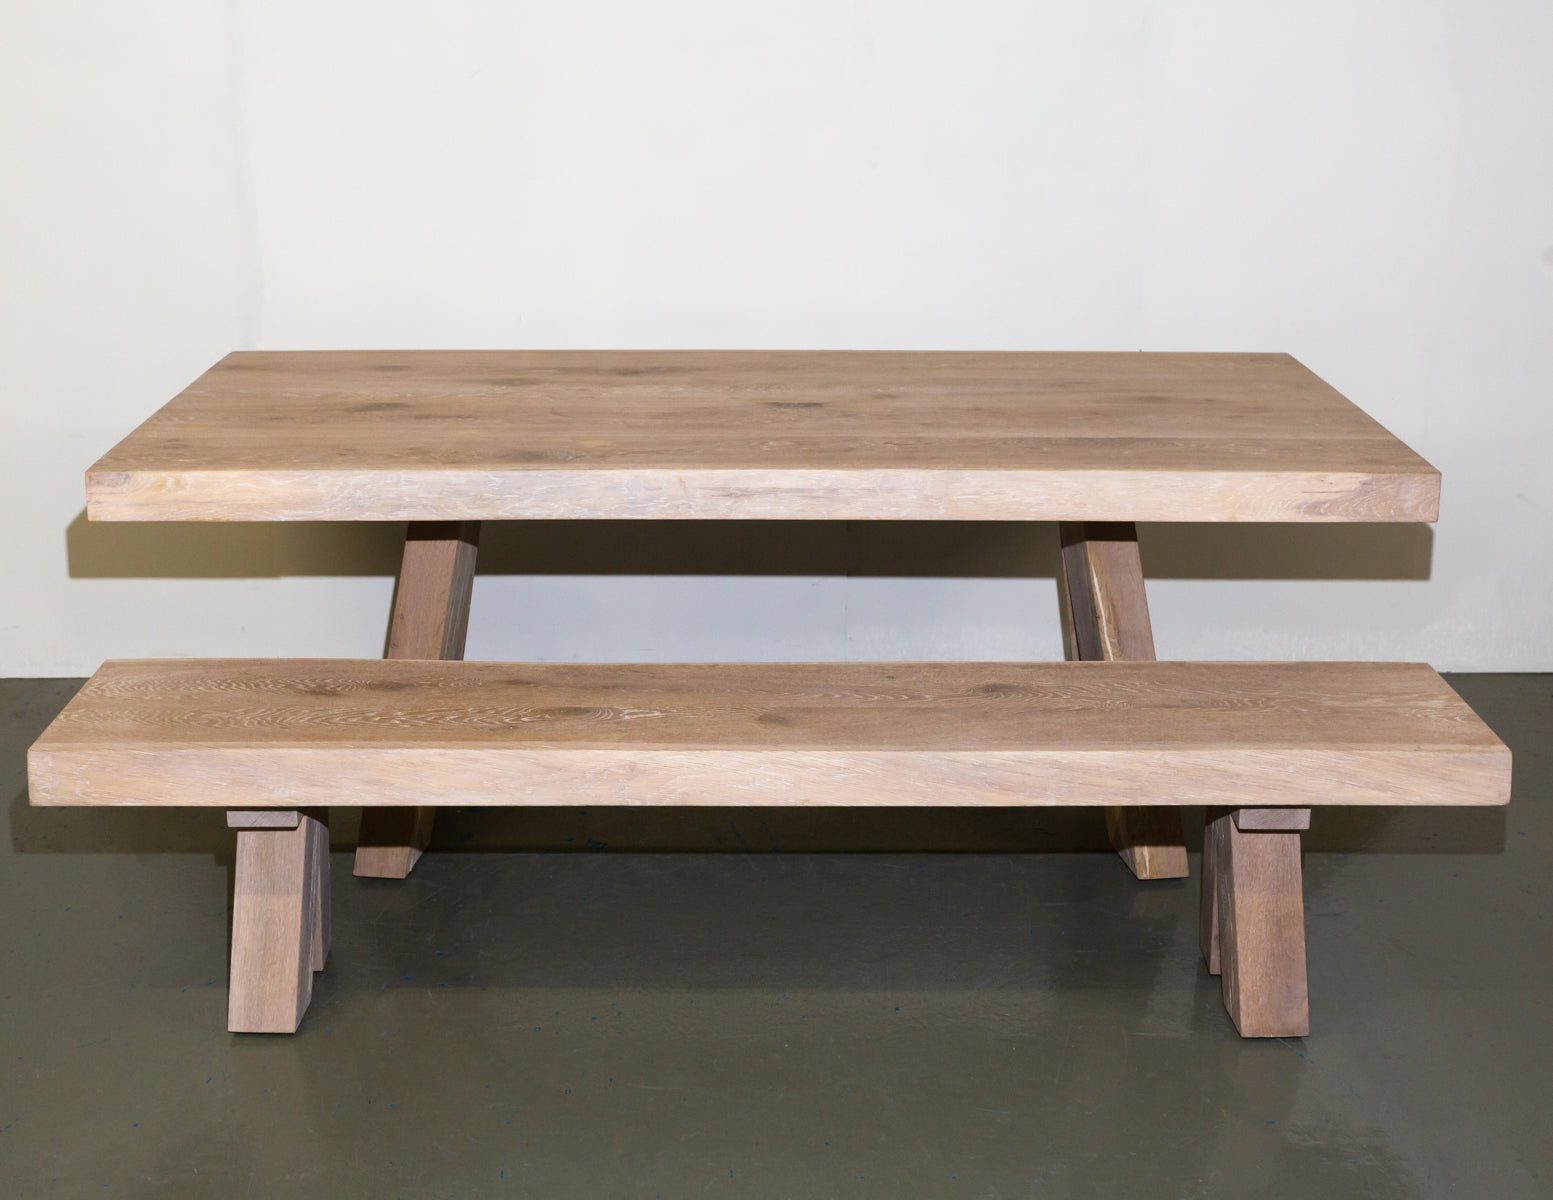 Solid Oak Lombok Kenta Dining Table and Bench